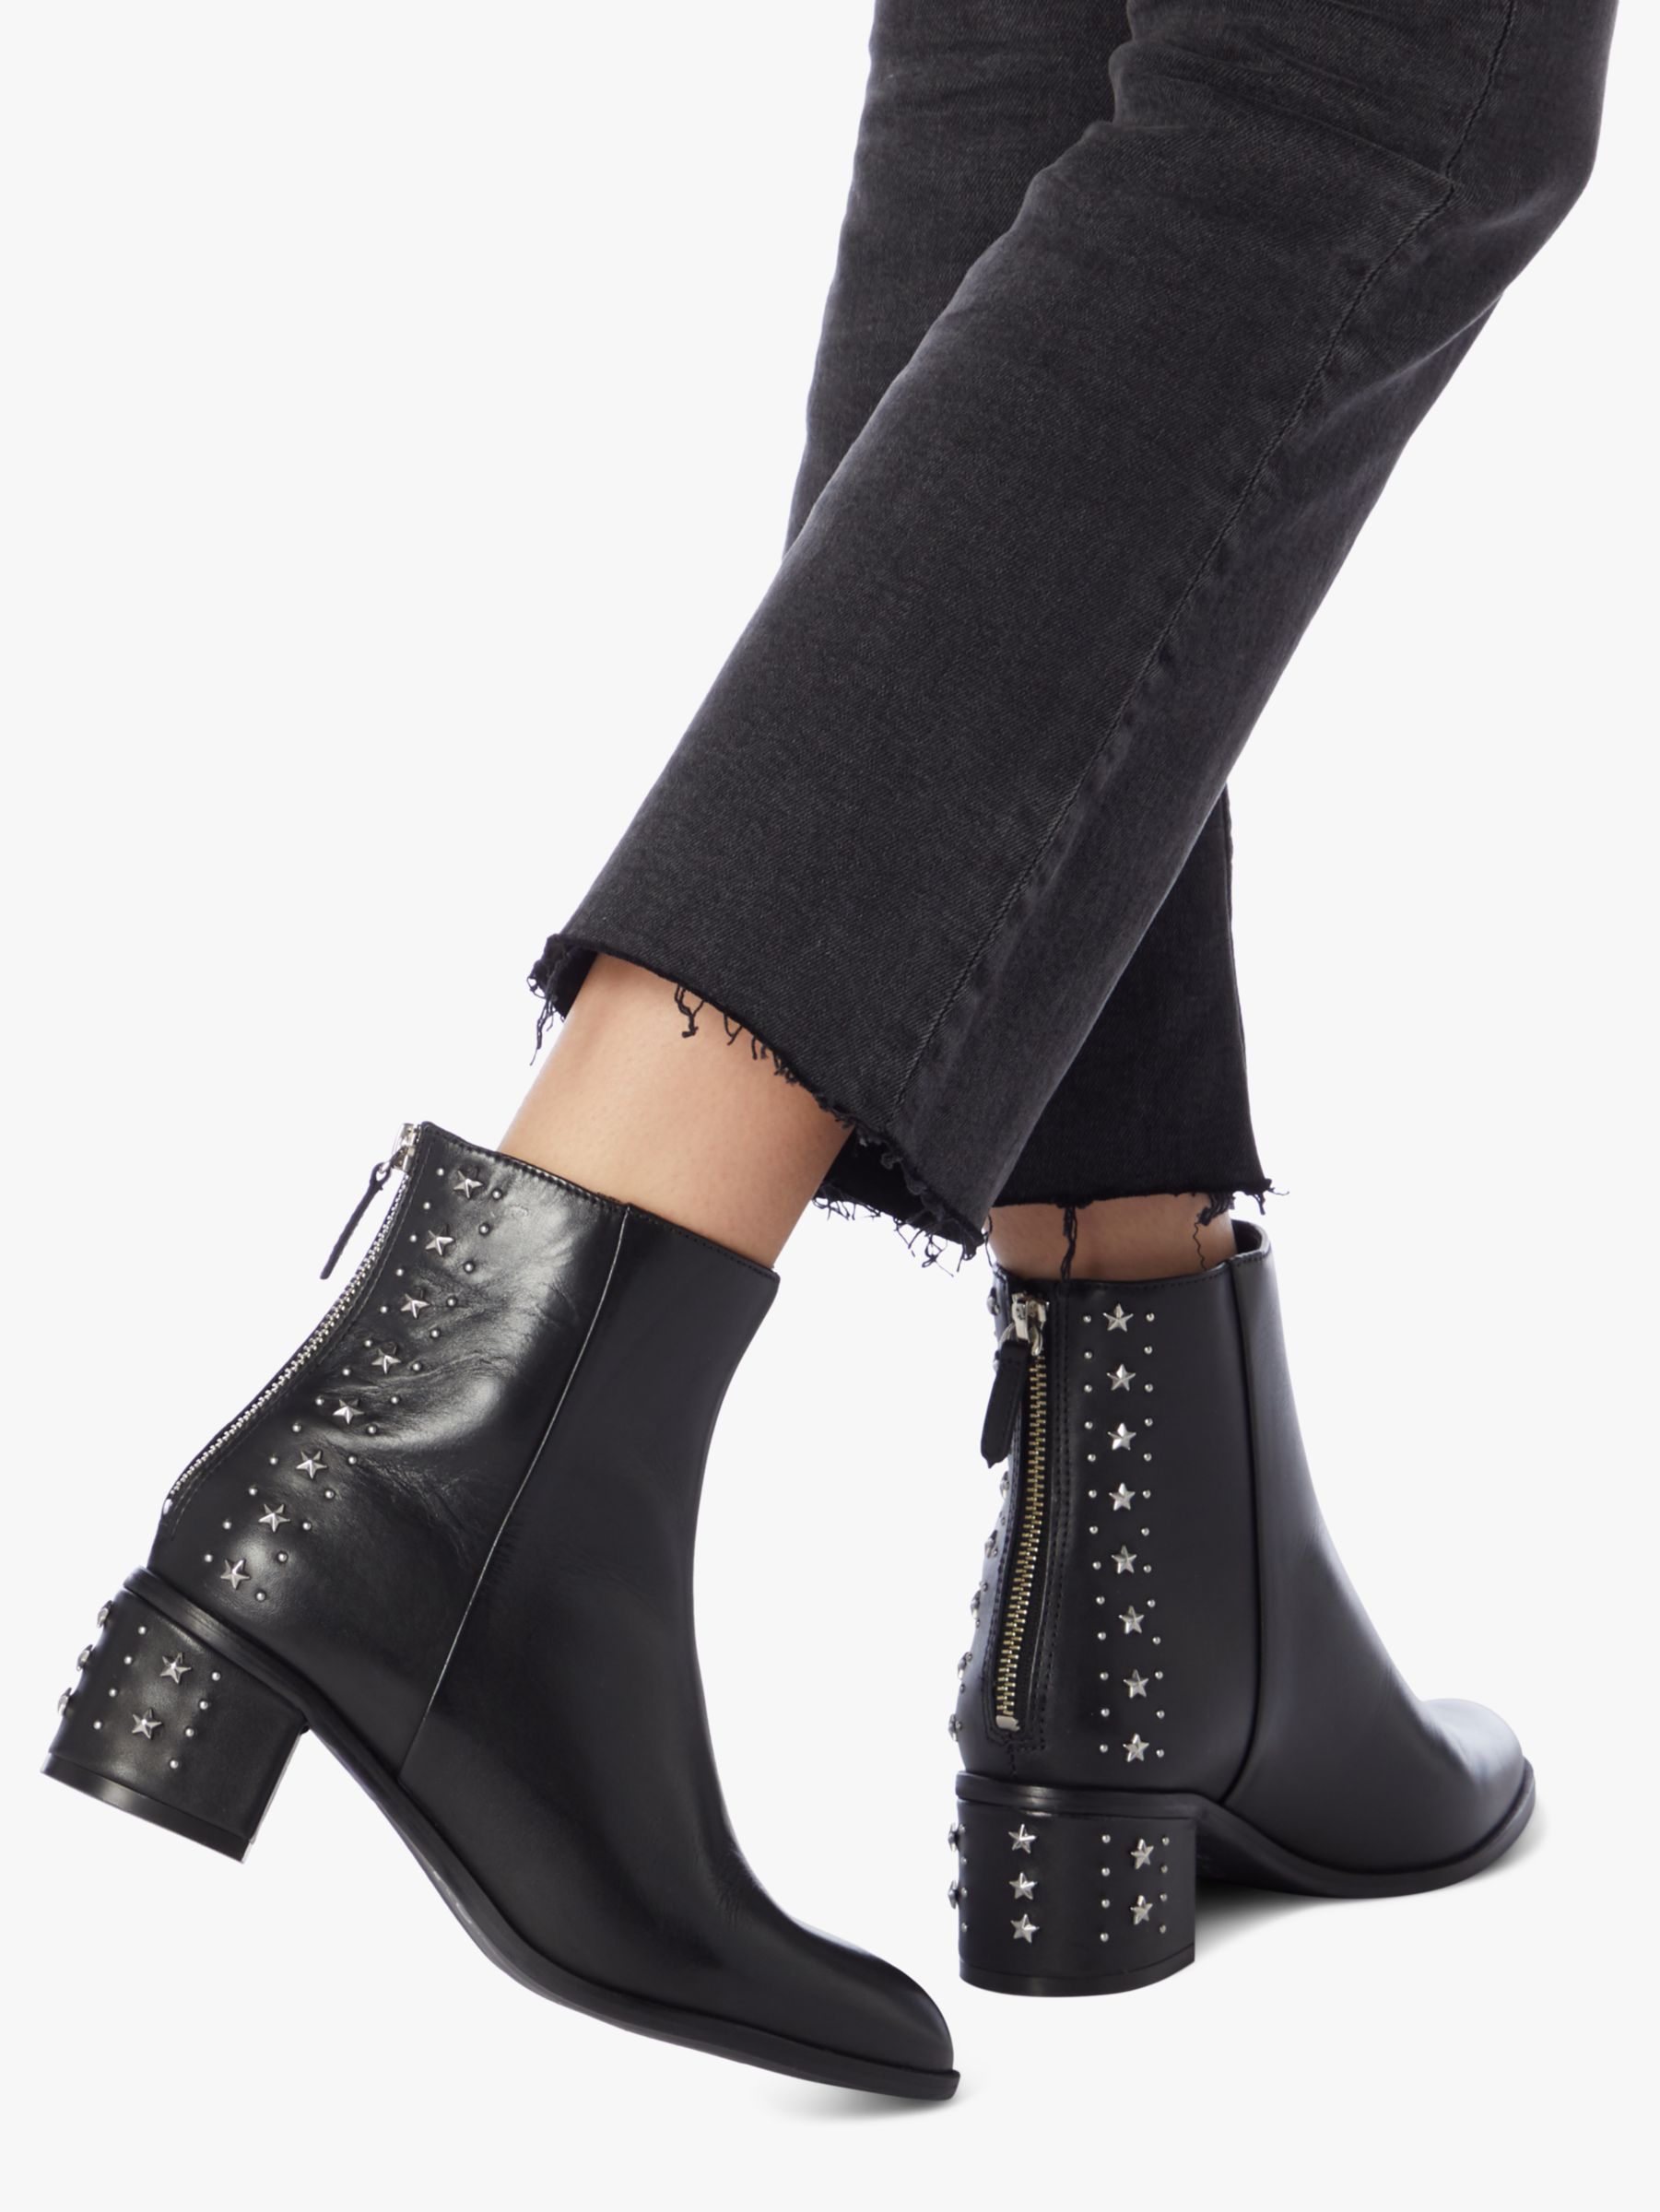 Dune Pino Leather Embellished Block Heel Ankle Boots, Black